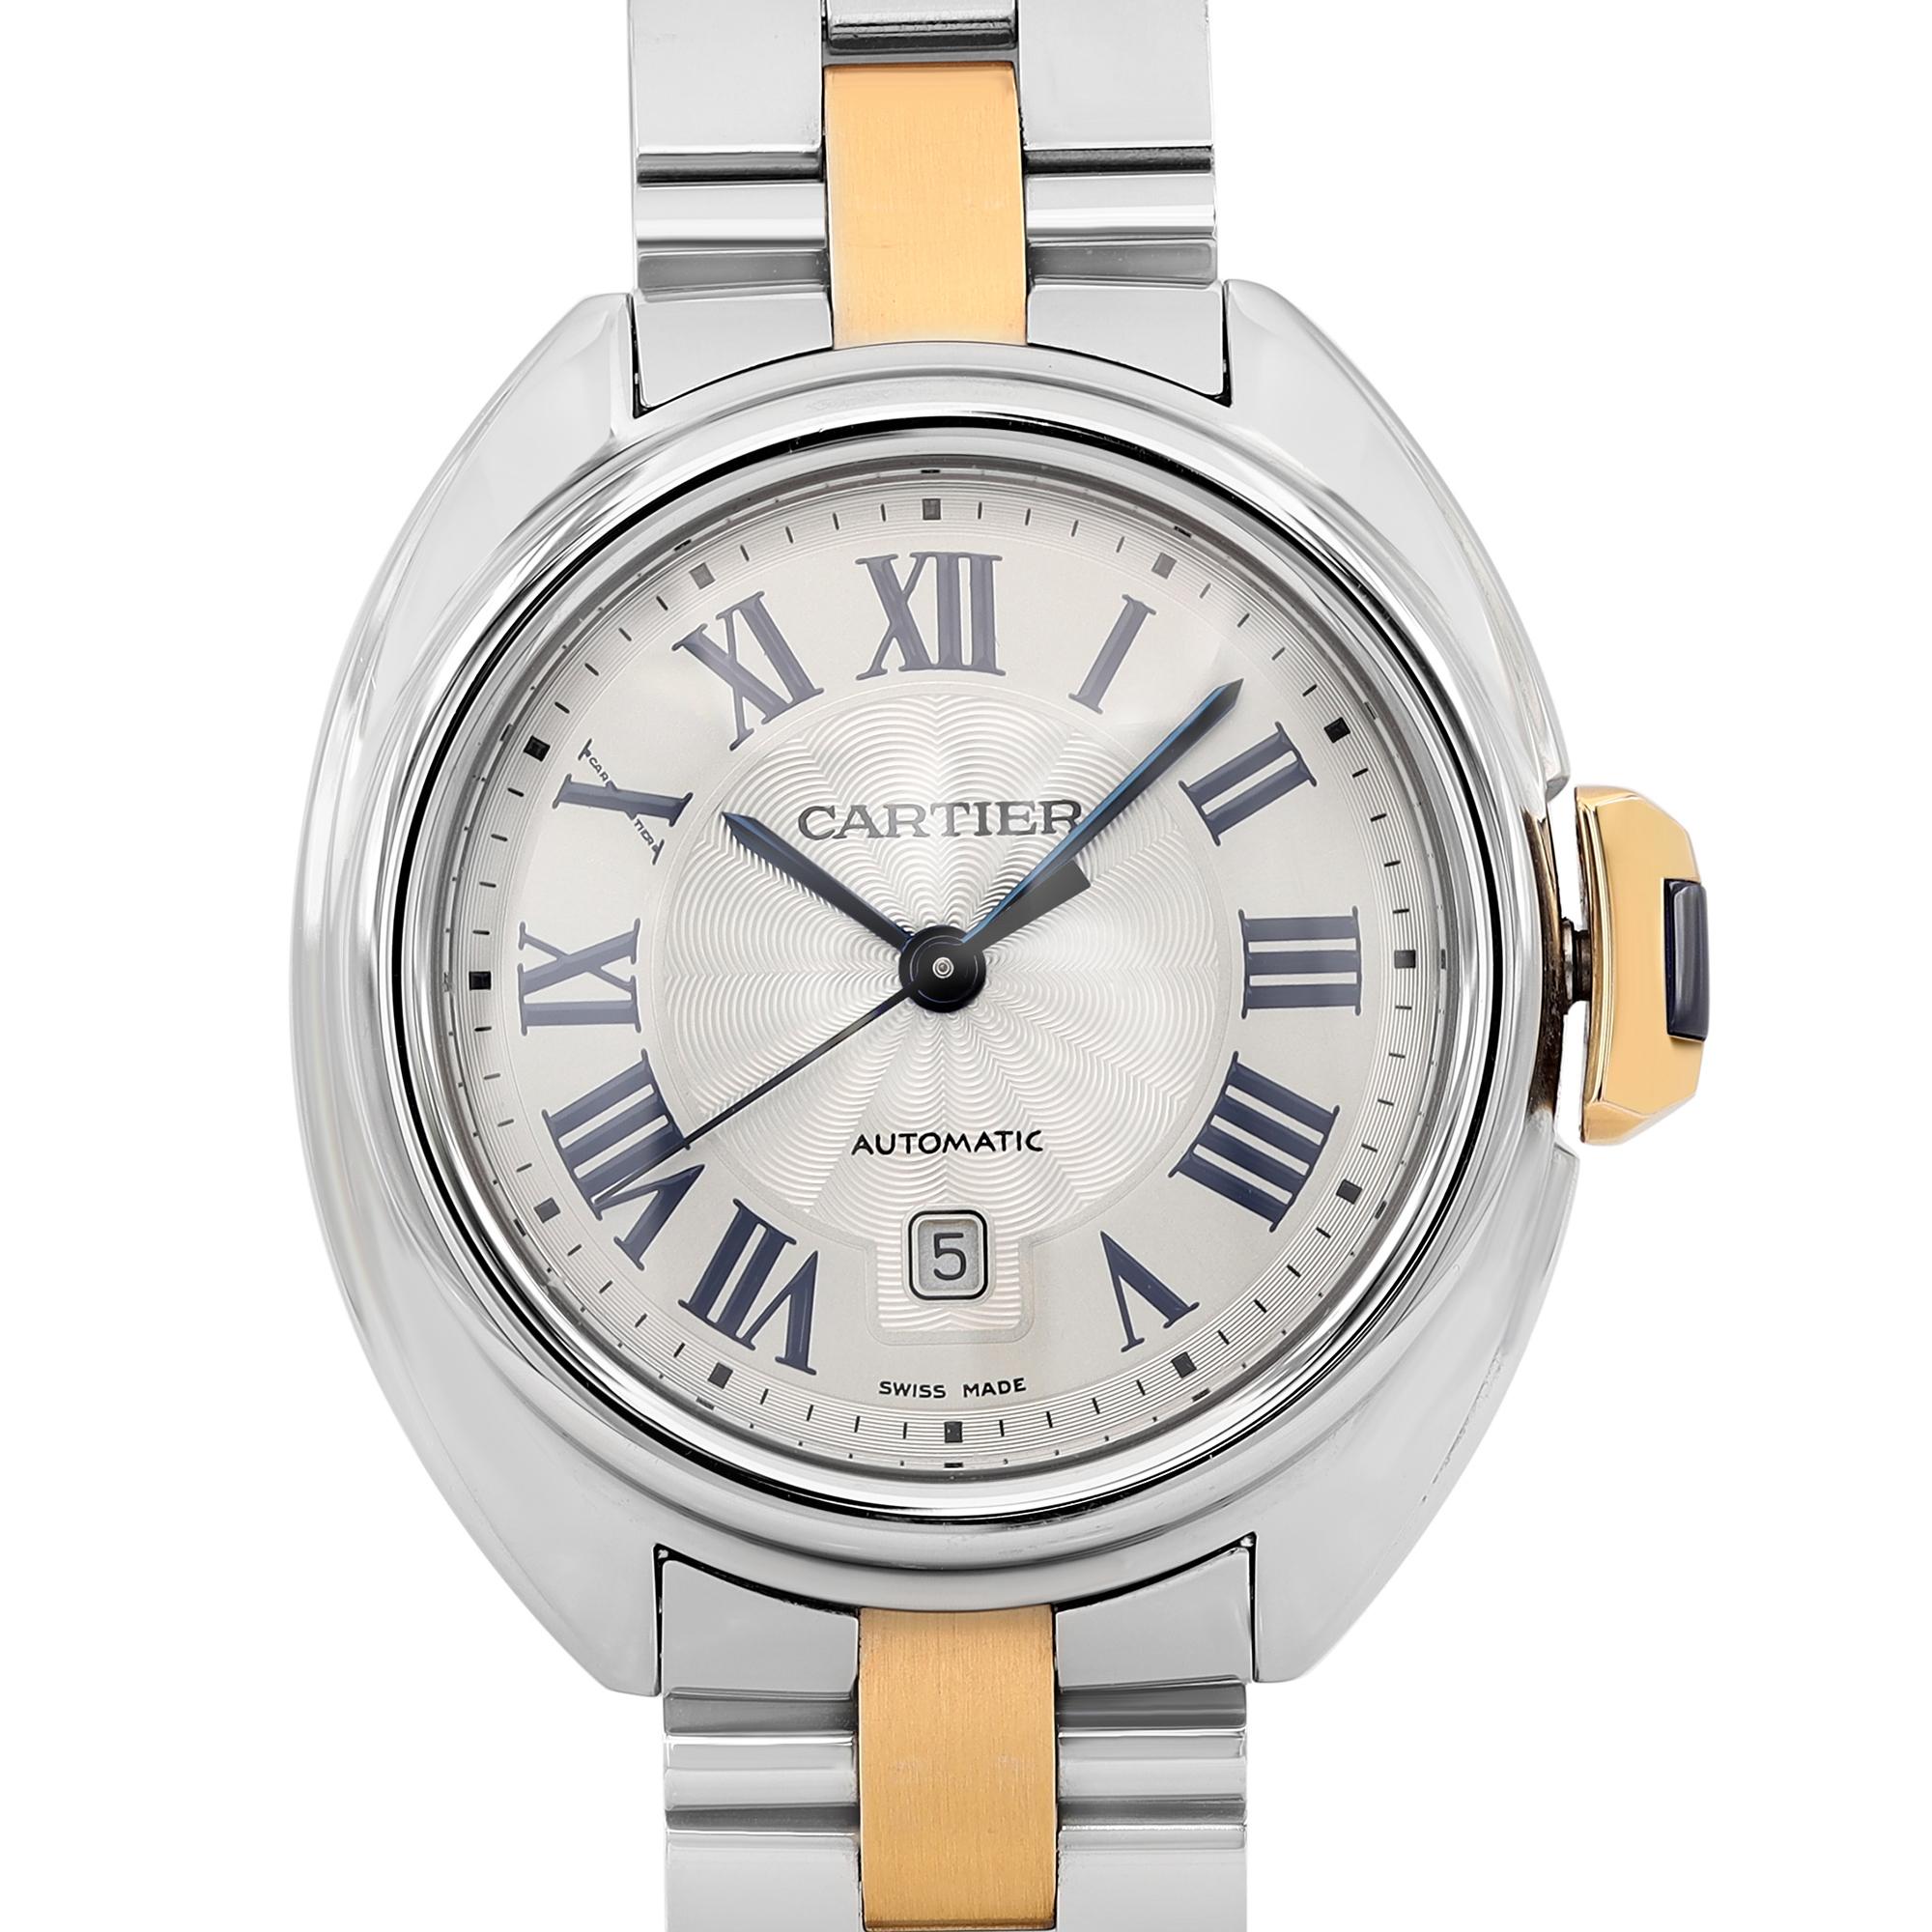 Pre-owned. Original box and papers are not included. Comes with a presentation box and an authenticity card. Covered by a 1-year warranty. 

Brand: Cartier  Type: Wristwatch  Department: Women  Model Number: W2CL0004  Country/Region of Manufacture: